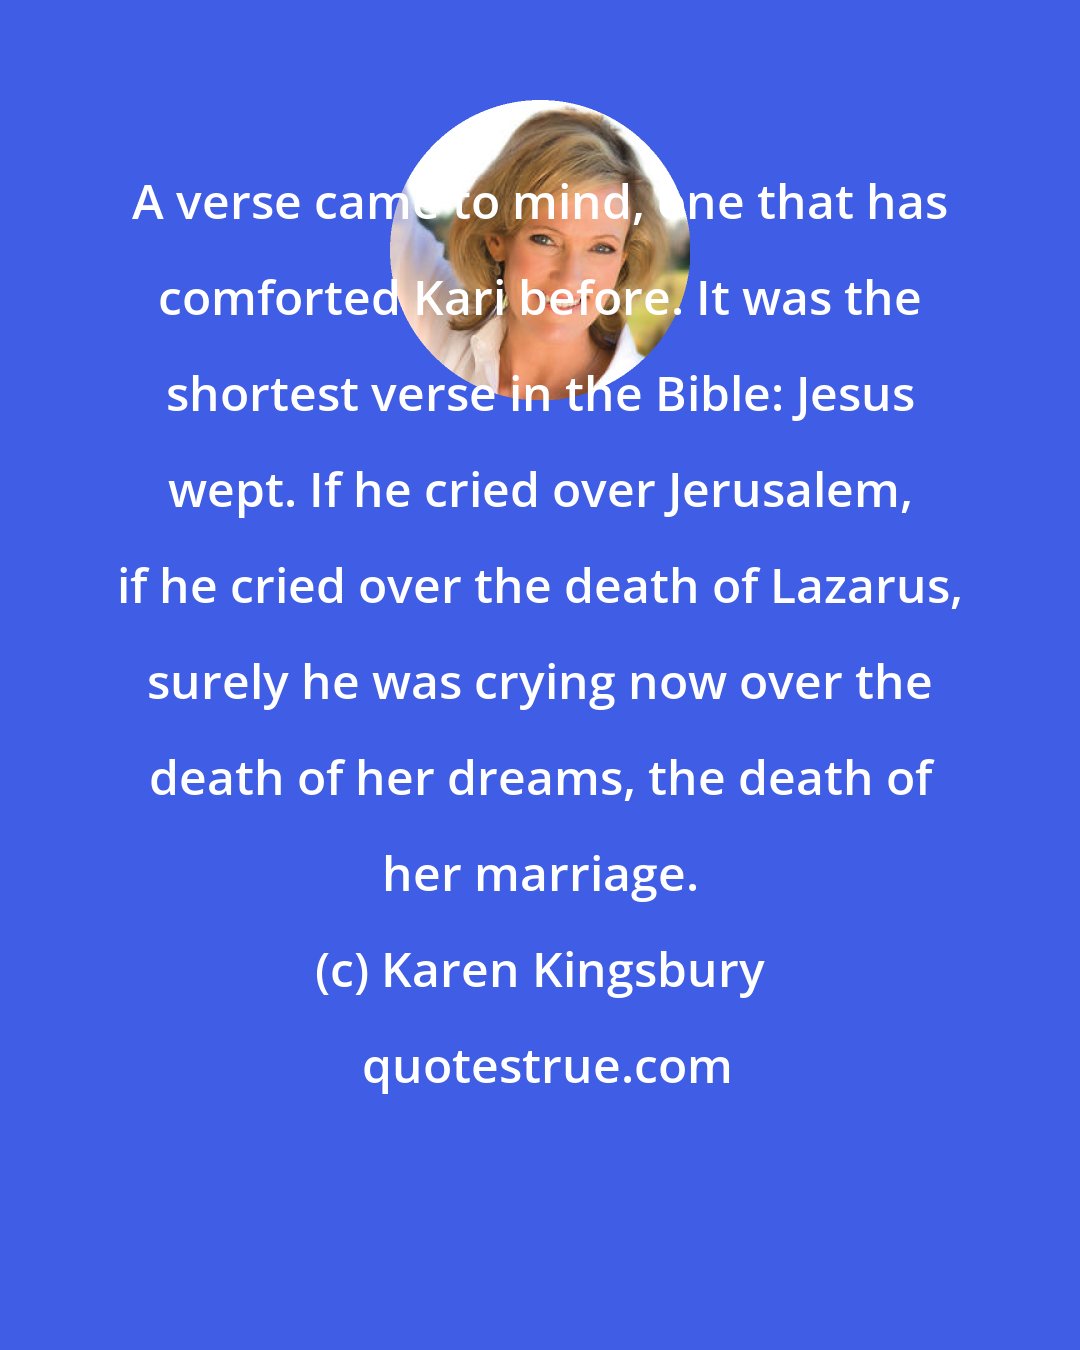 Karen Kingsbury: A verse came to mind, one that has comforted Kari before. It was the shortest verse in the Bible: Jesus wept. If he cried over Jerusalem, if he cried over the death of Lazarus, surely he was crying now over the death of her dreams, the death of her marriage.